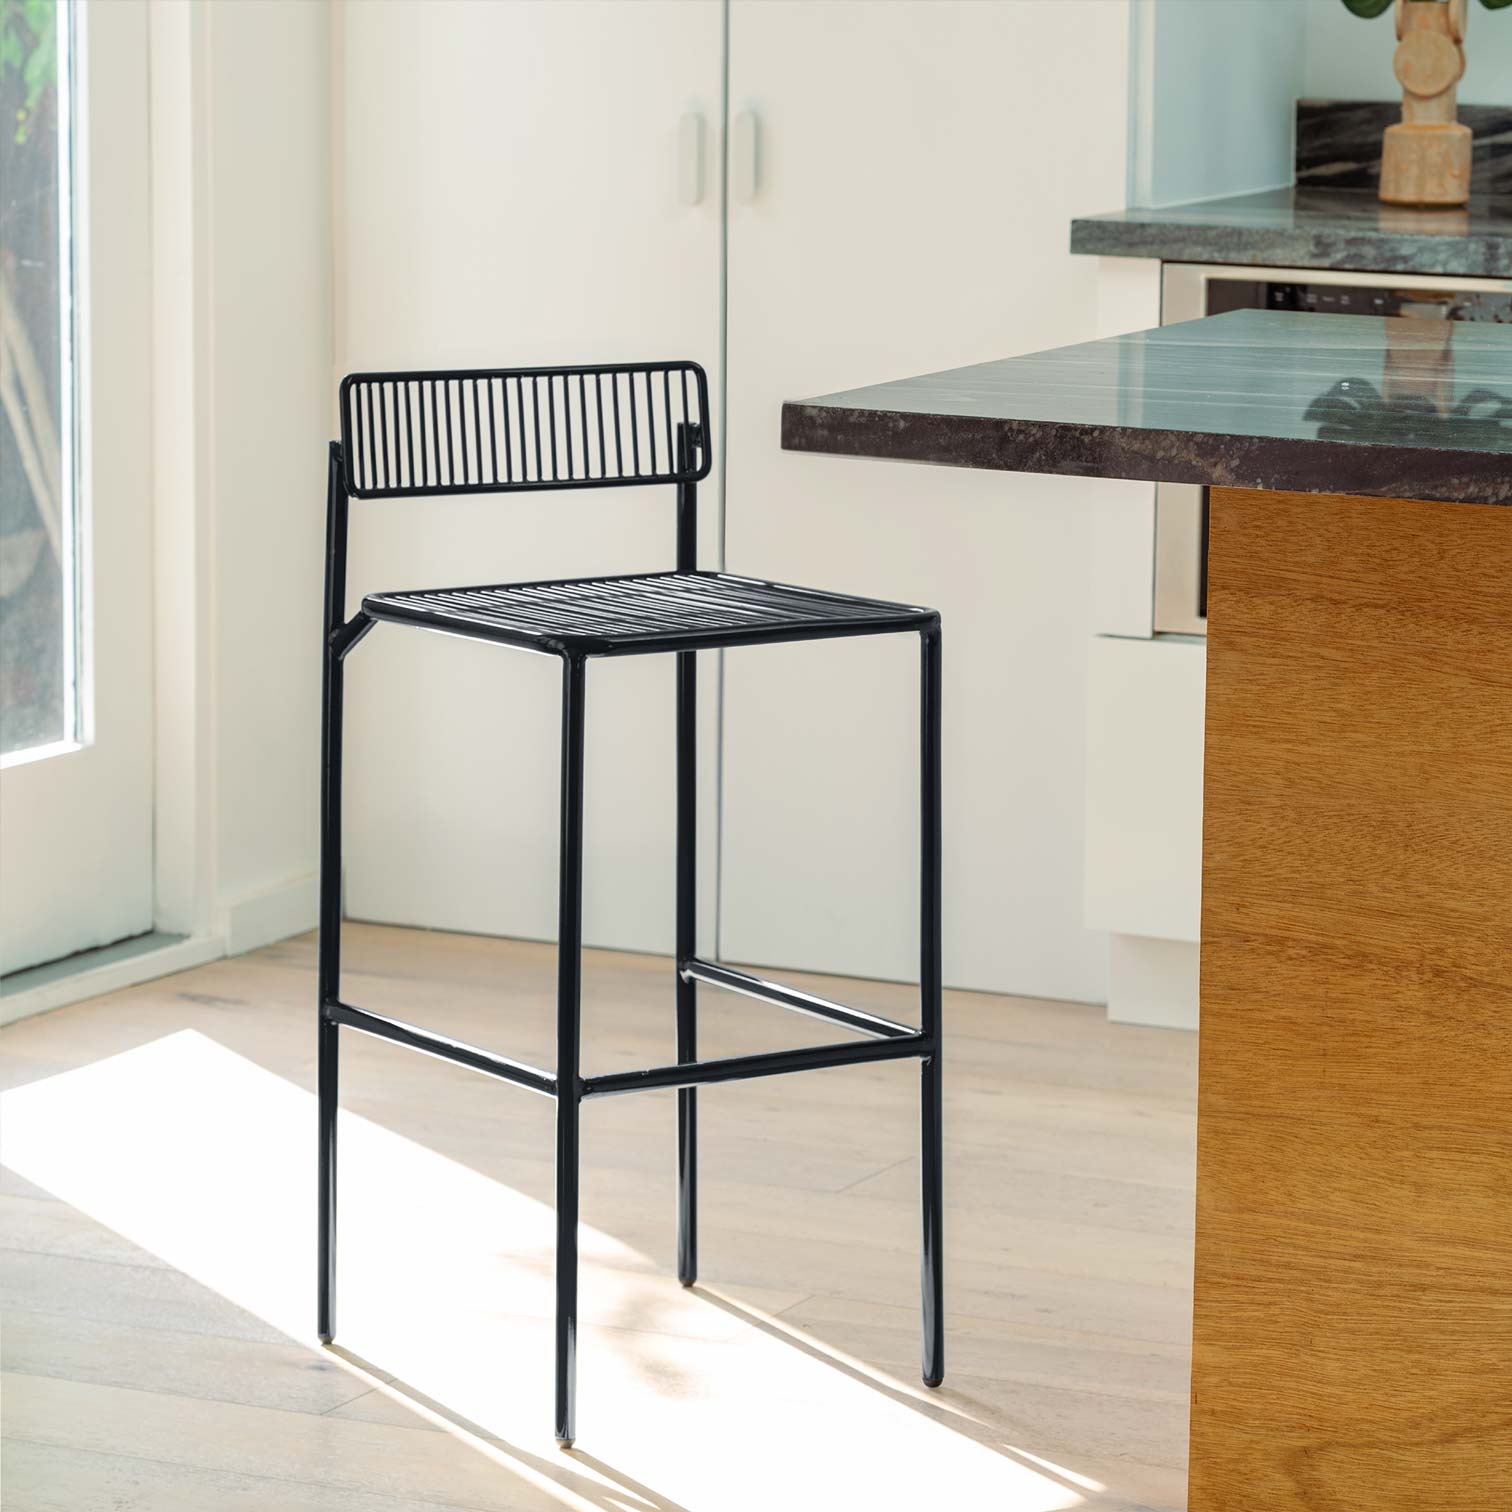 Rachel Counter Stool shown in Black in Kitchen Counter Top area.